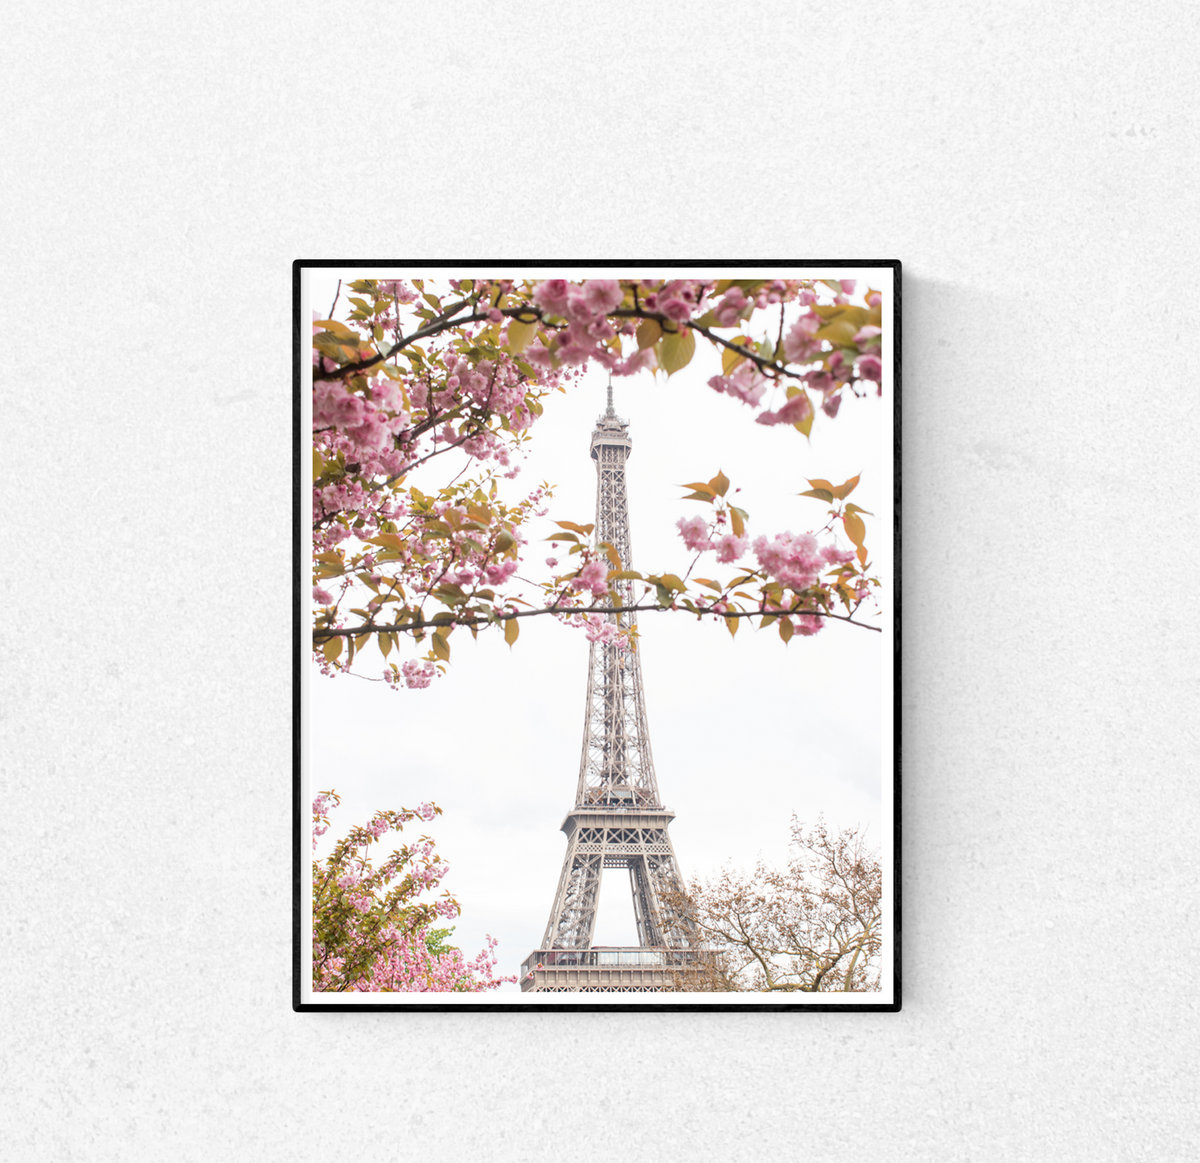 Spring Cherry Blossoms at The Eiffel Tower - Every Day Paris 